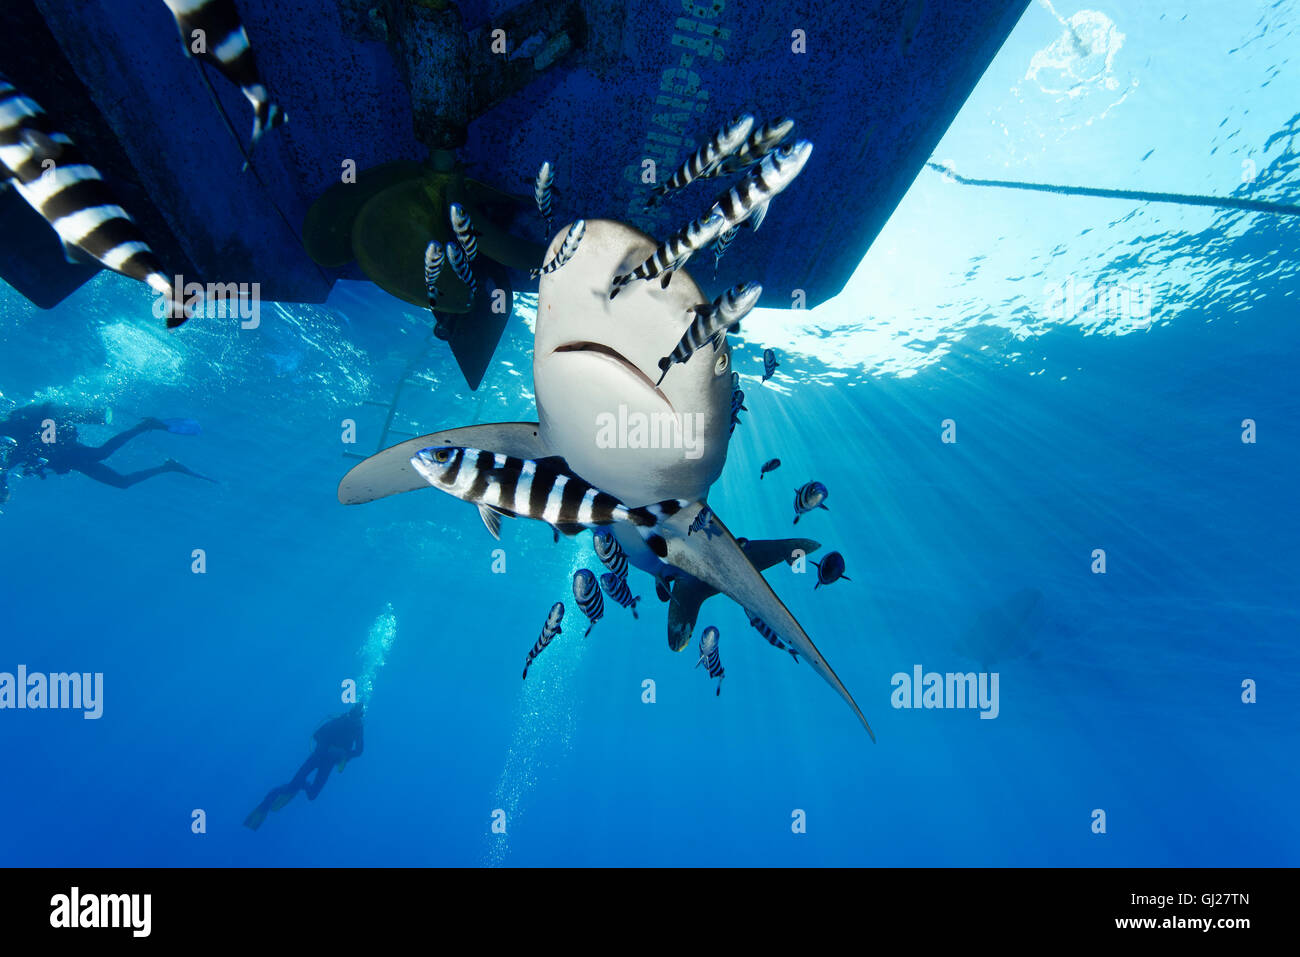 Oceanic whitetip shark with pilotfish and scuba diver, Daedalus Reef, Red Sea, Egypt Stock Photo